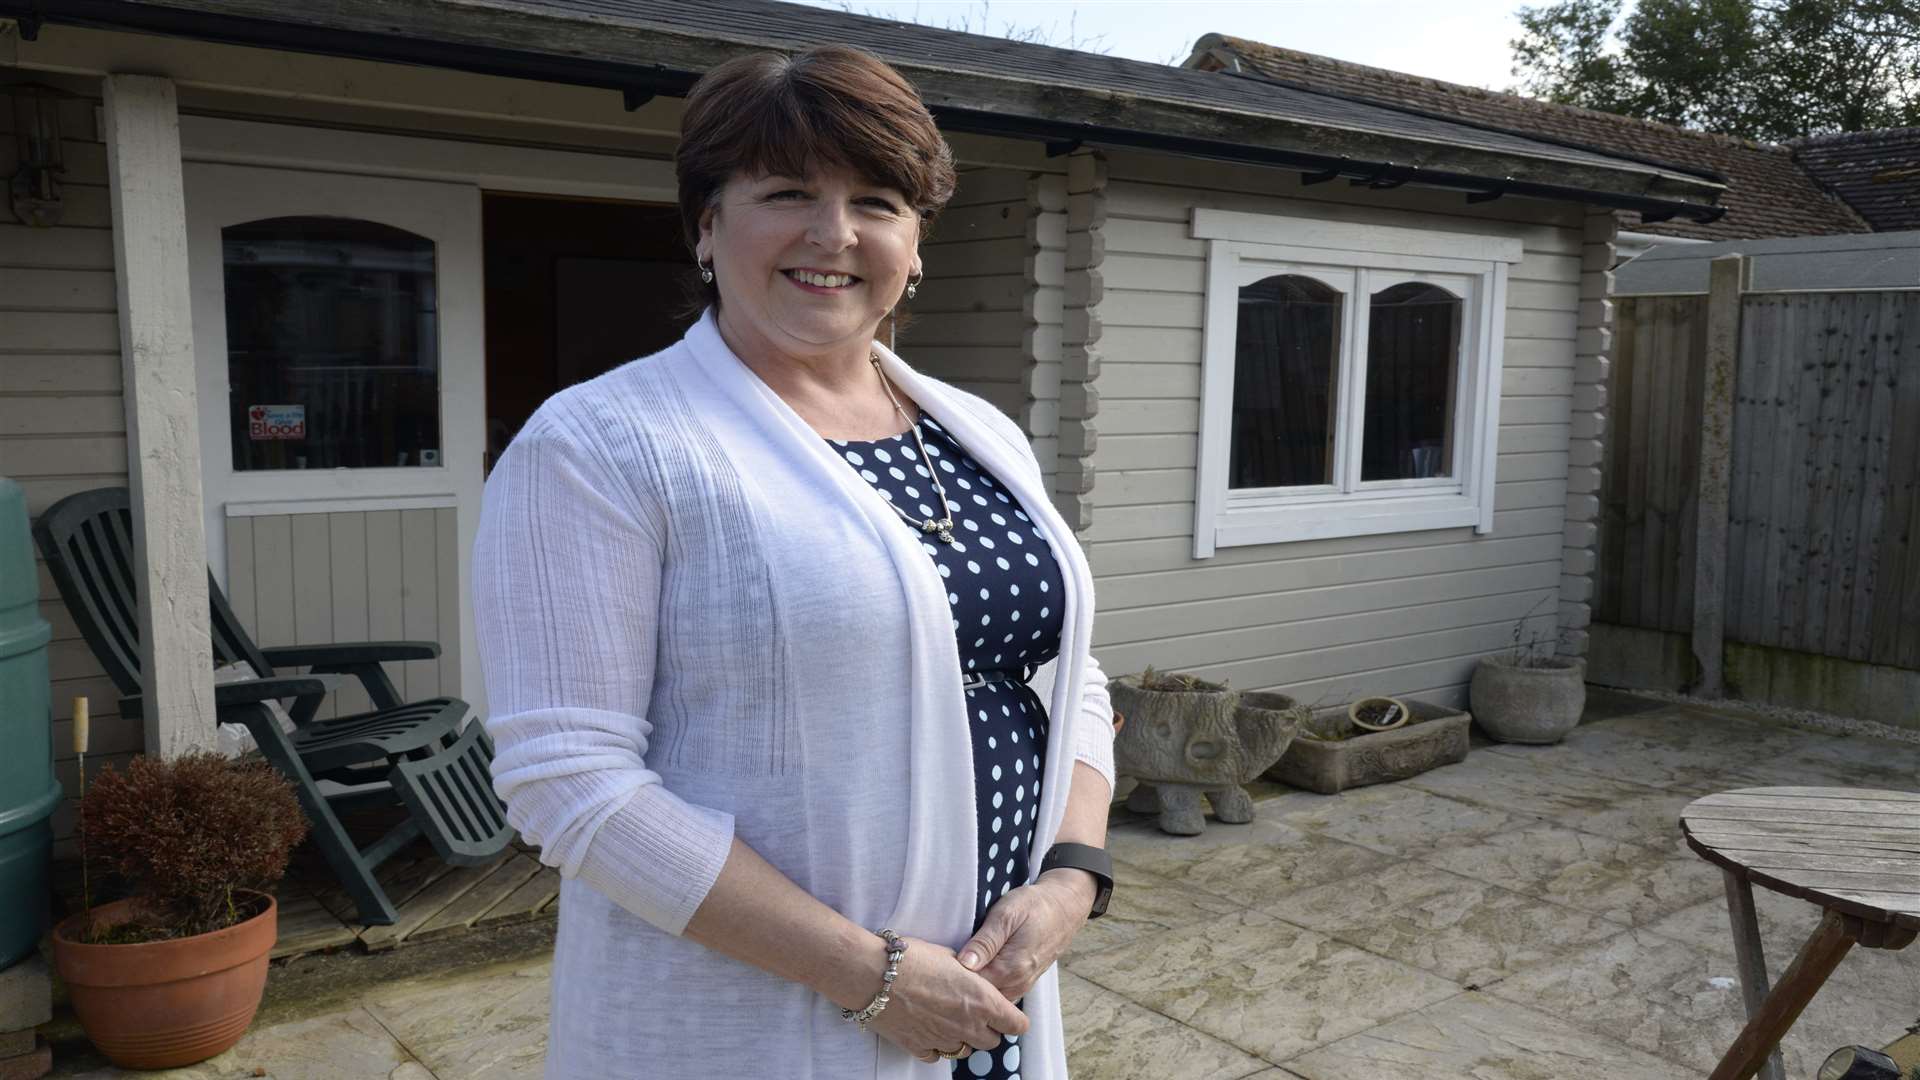 Trish Stretton who runs her company People face2face from her home in Swalecliffe, Whitstable